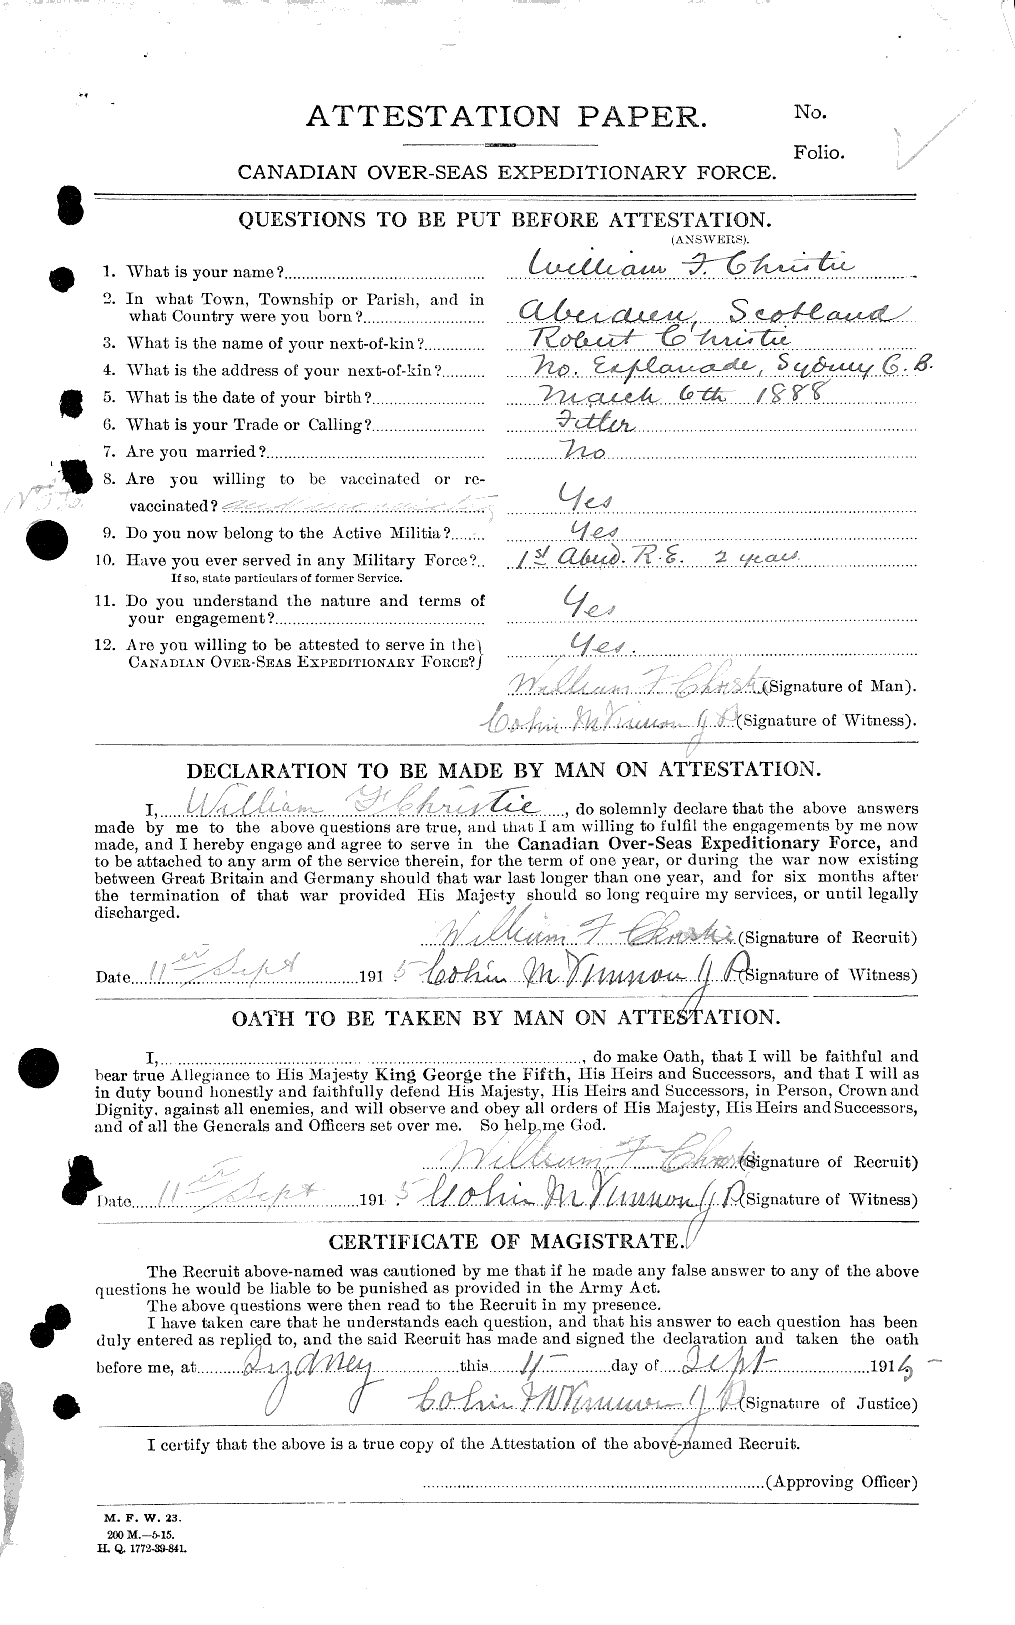 Personnel Records of the First World War - CEF 022093a